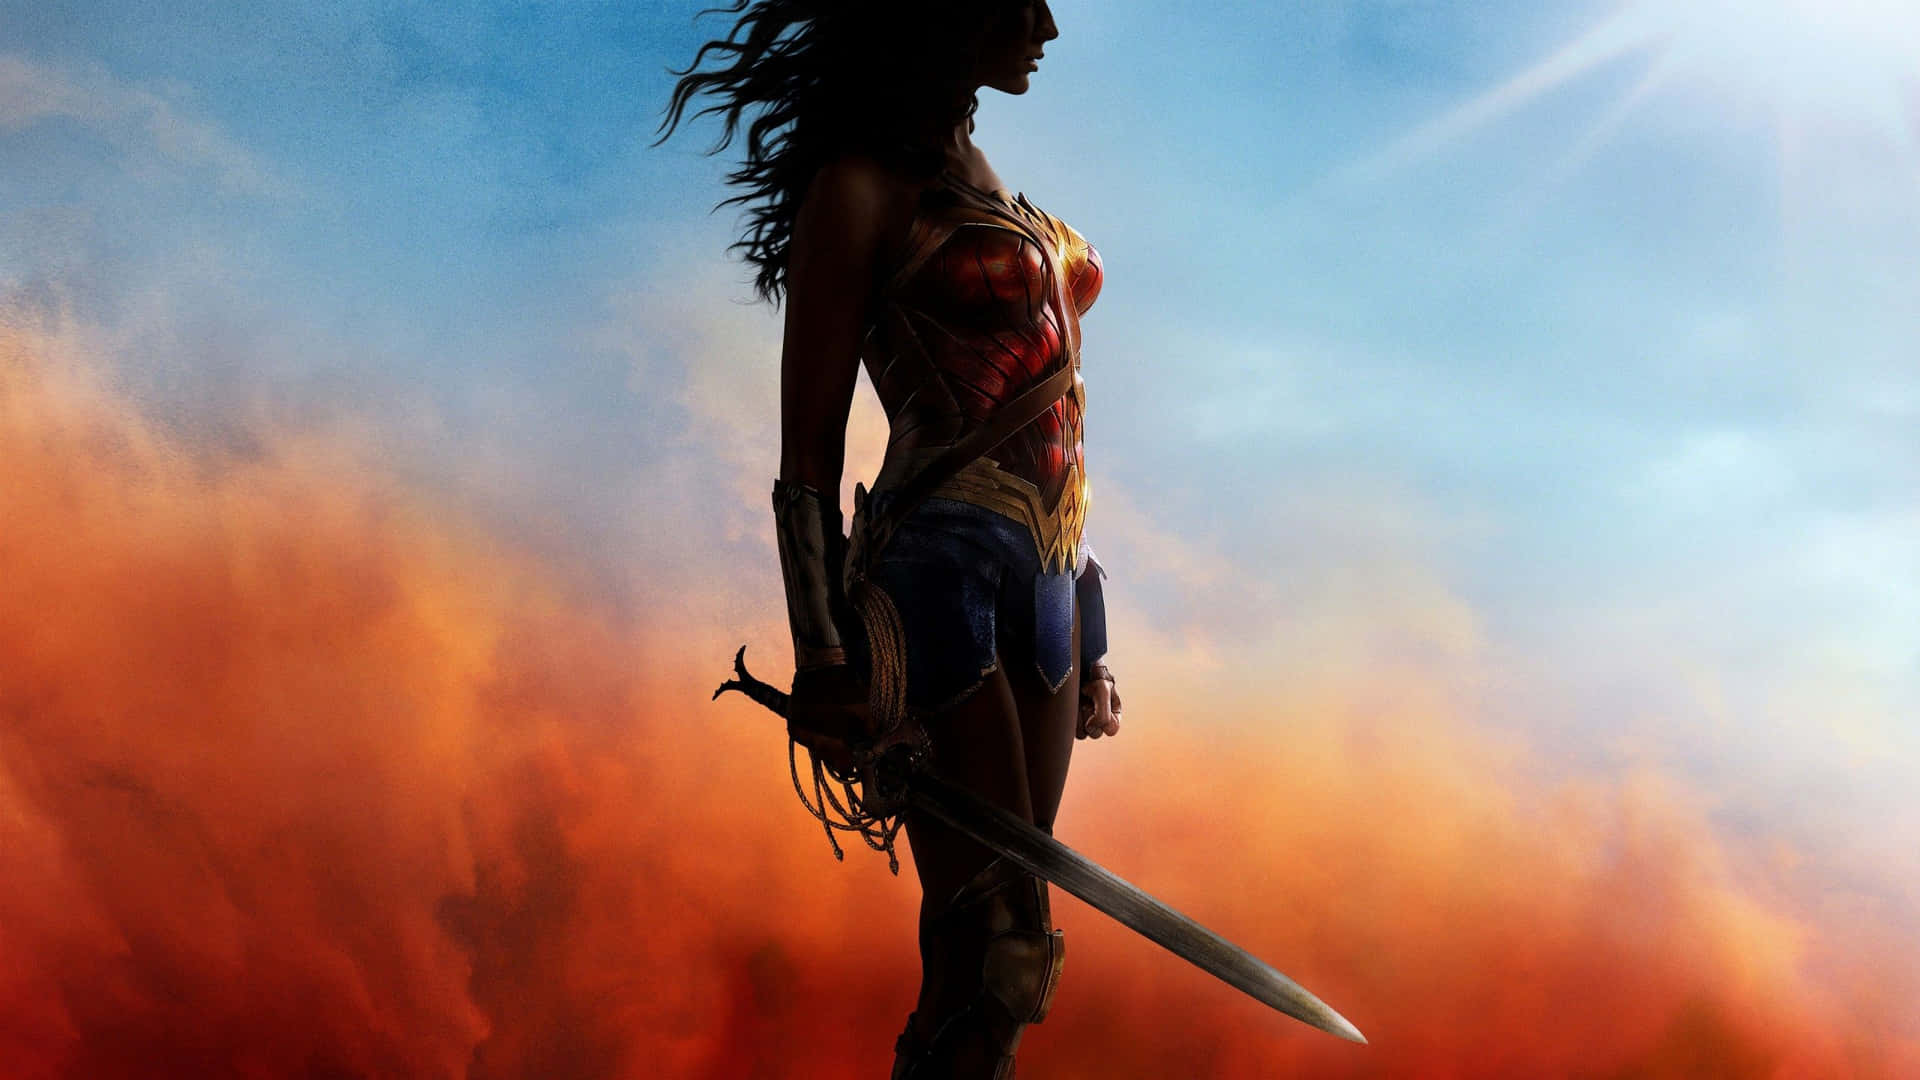 Wonder Woman standing strong surrounded by fires